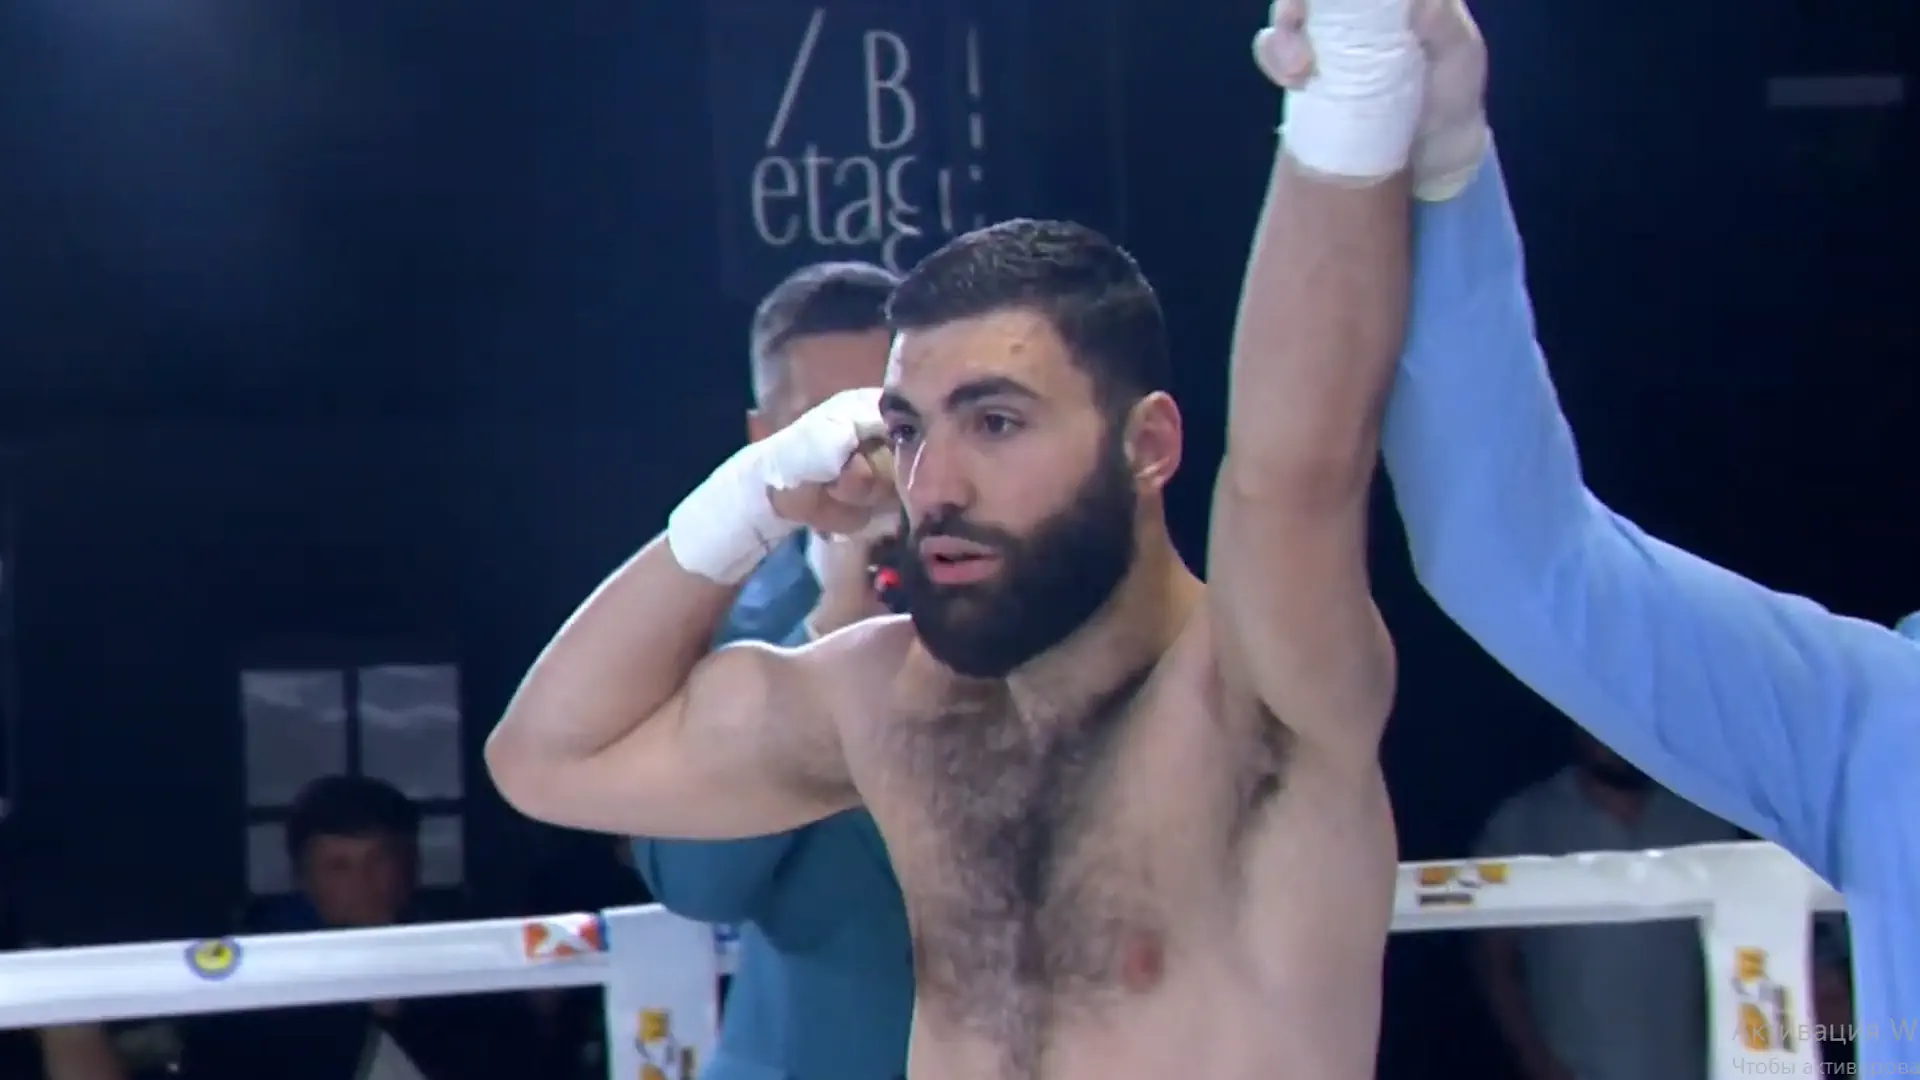 Liparit Ustian wins 10th anniversary victory in boxing (video)